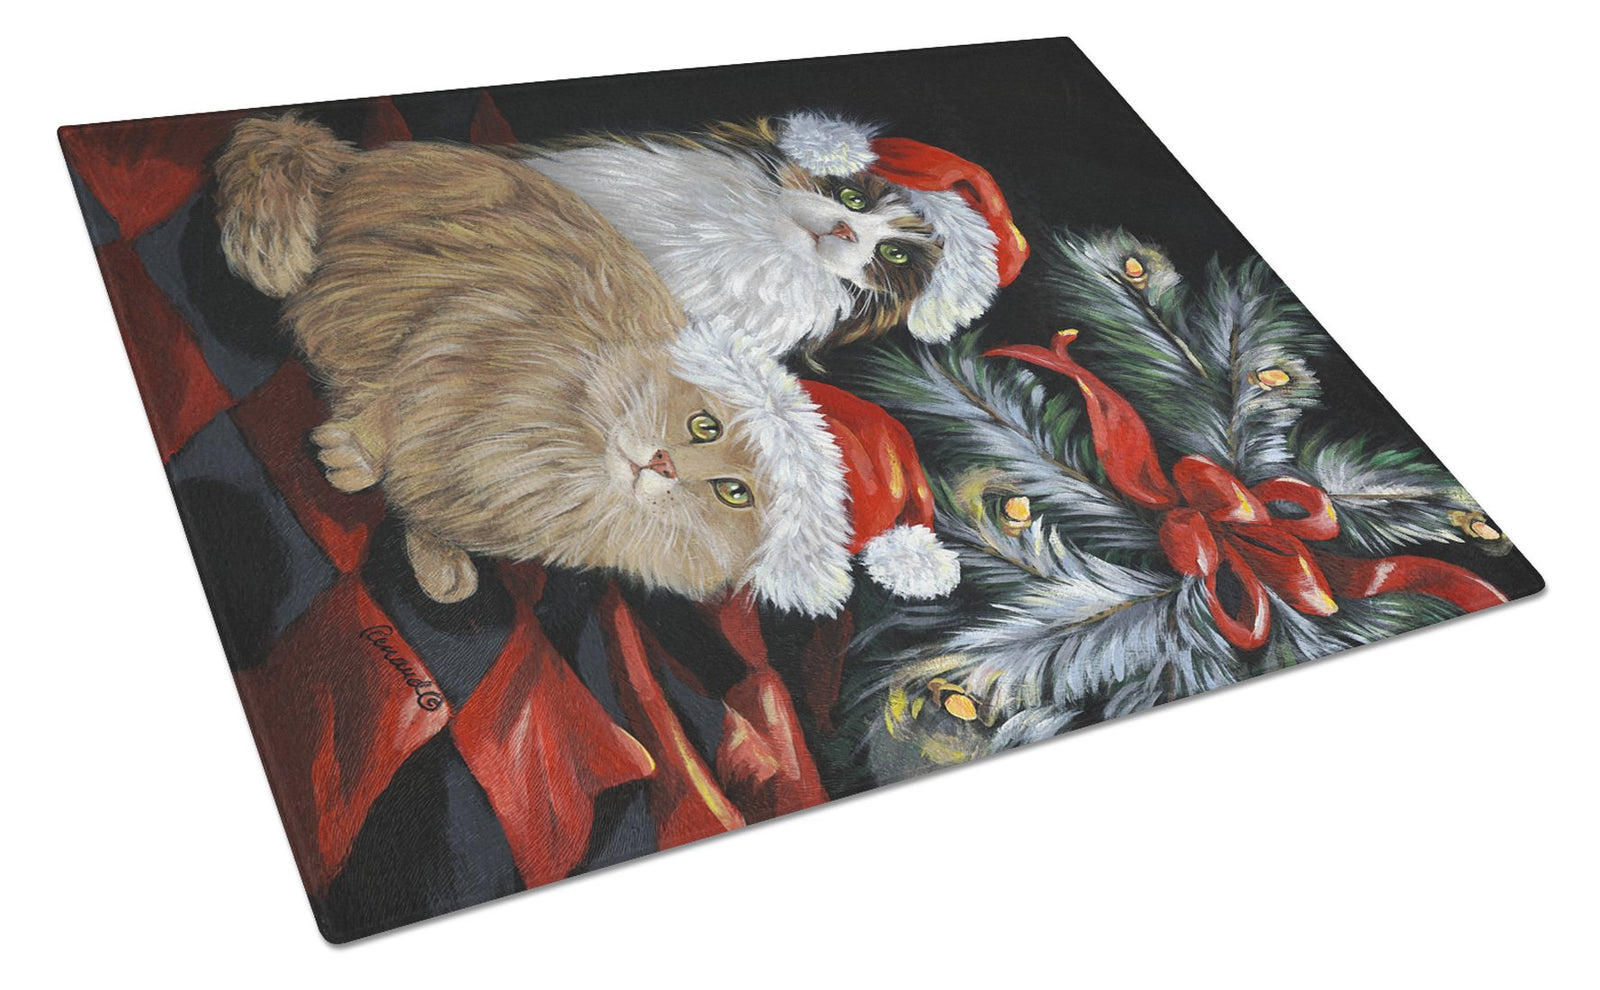 Cat Kitty Glitter Christmas Glass Cutting Board Large PPP3062LCB by Caroline's Treasures